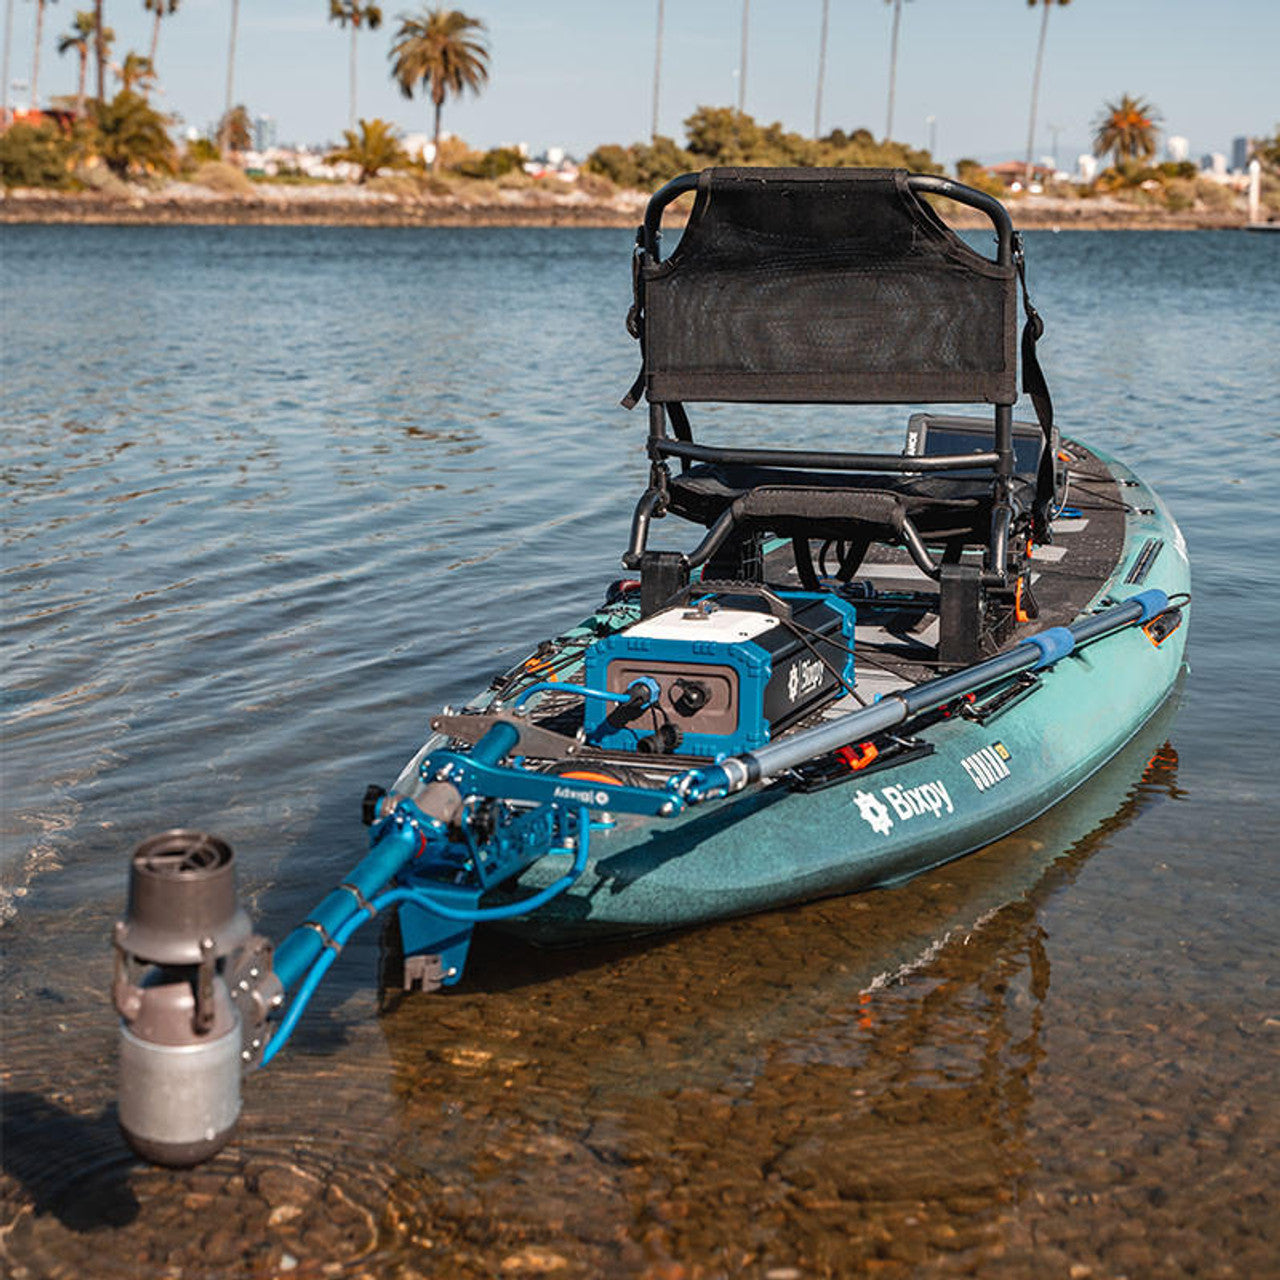 Bixpy K-1 Outboard Kit with SUN80 Solar Panel - Electric Marine Trolling Motor with 378 Wh Battery,Perfect for Kayak, Inflatable Watercraft, Paddle Boards